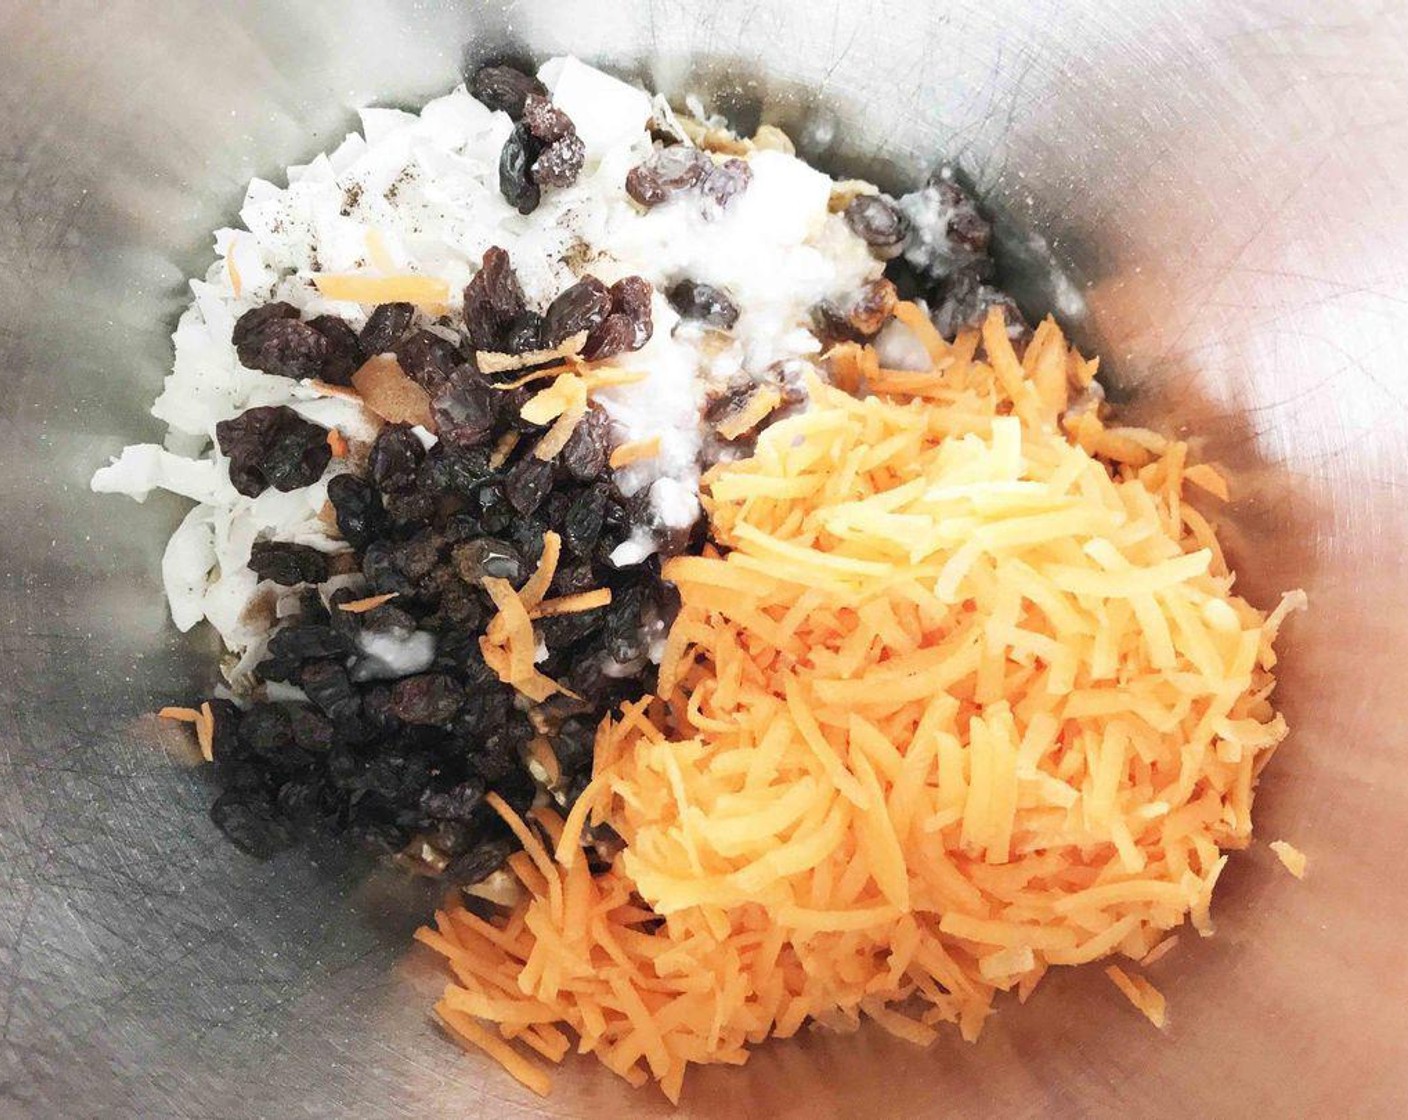 step 3 In a large bowl, mix together Old Fashioned Rolled Oats (2 cups), shredded carrot, Unsalted Raw Pecans (1 cup), Raw Walnuts (1 cup), Unsweetened Coconut Flakes (1/2 cup), {@11:}, Maple Syrup (1/4 cup), Coconut Oil (1/4 cup), Ground Cinnamon (1 tsp), {@12:}, Ground Ginger (1/4 tsp), {@10:}, Ground Nutmeg (1/8 tsp), and Ground Cloves (1 pinch)